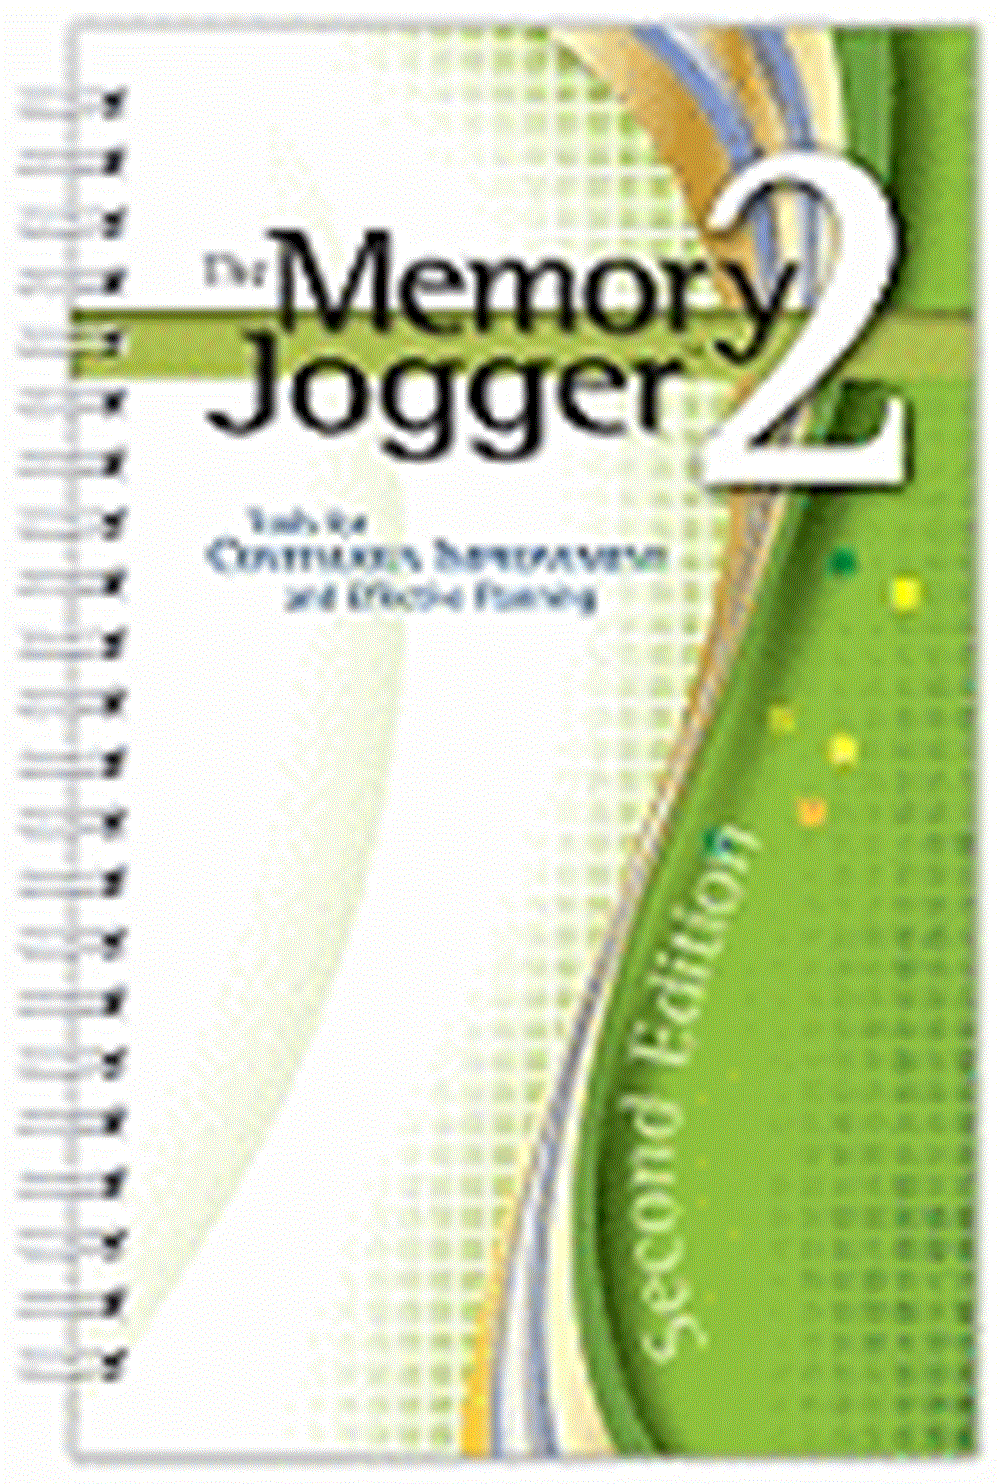 Memory Jogger 2 Tools for Continuous Improvement and Effective Planning